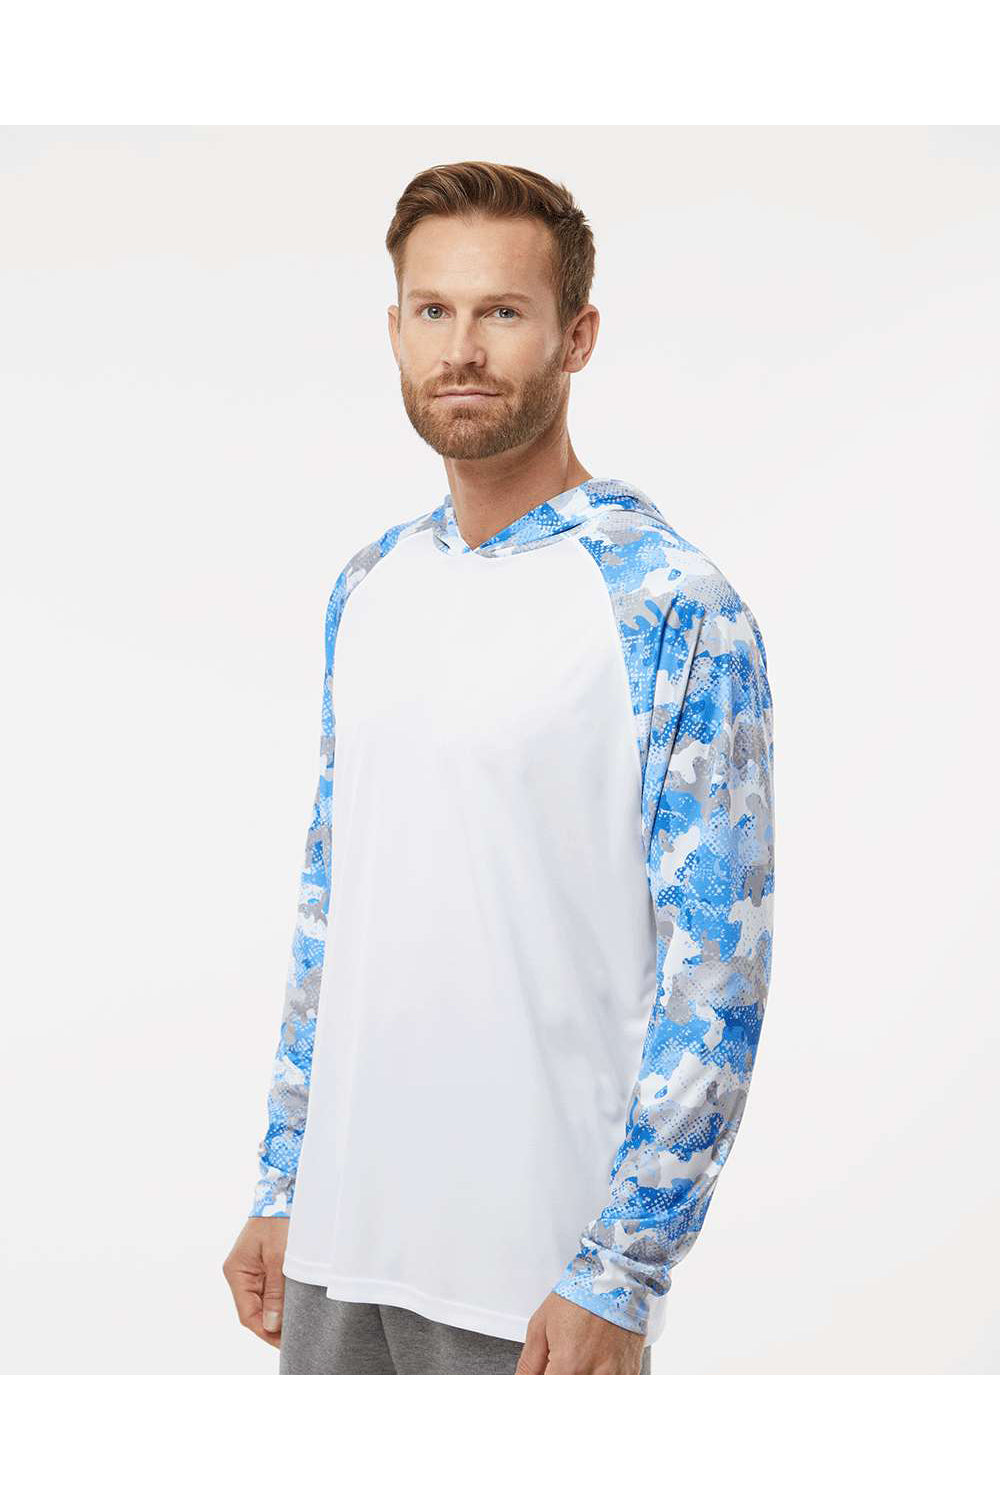 Paragon 240 Mens Tortuga Extreme Performance Long Sleeve Hooded T-Shirt Hoodie White/Blue Mist Camo Model Side